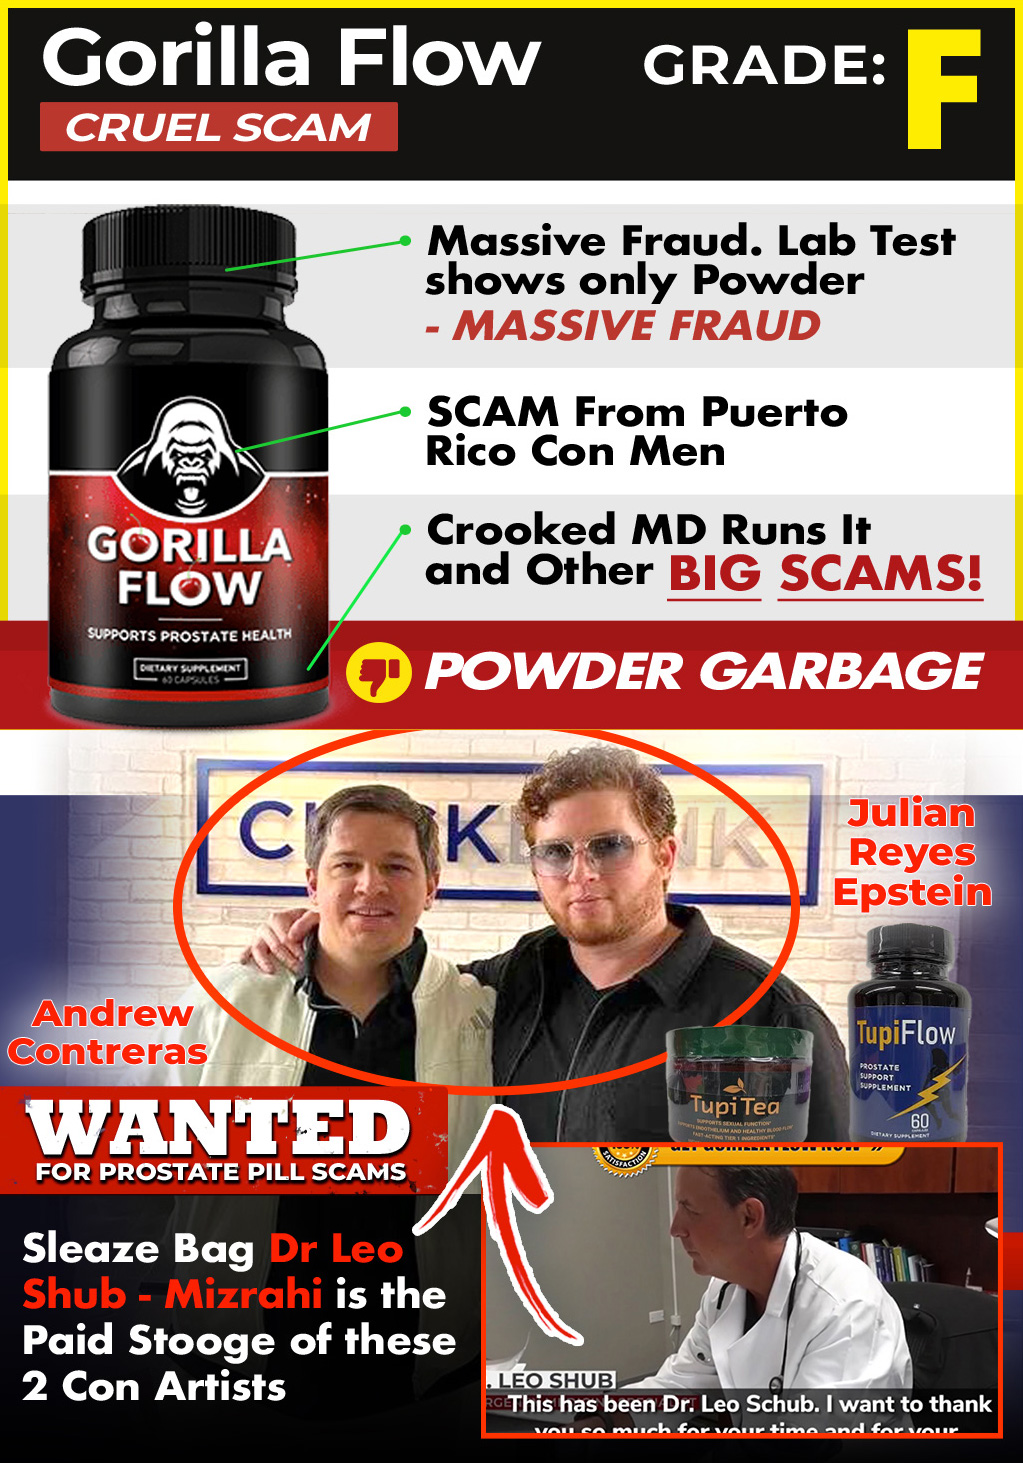 Gorilla Flow - product rating and information card